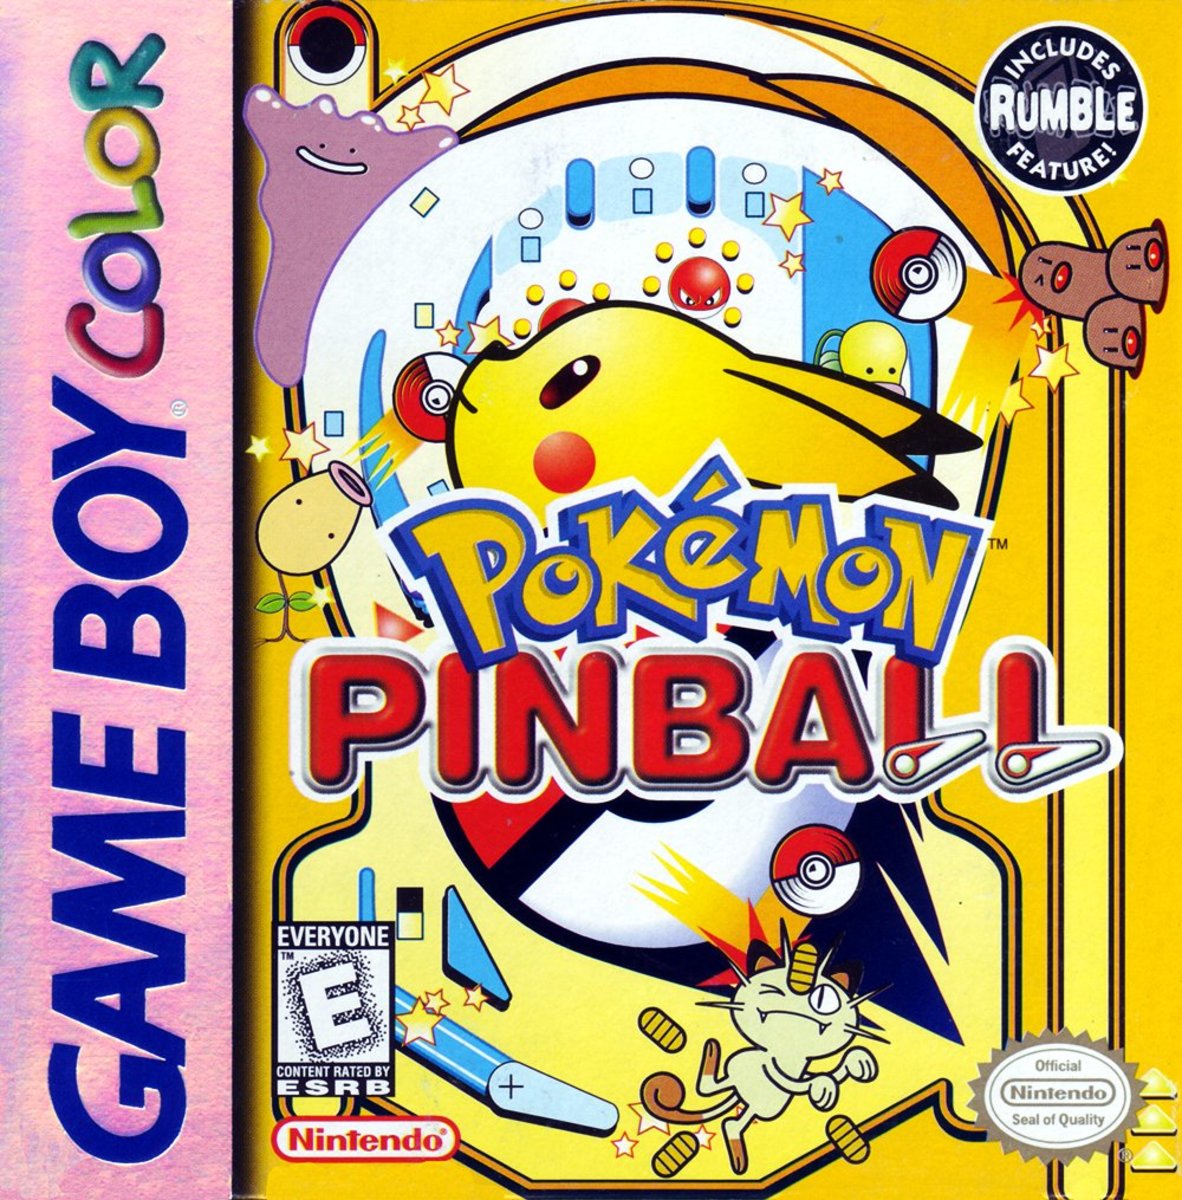 Box art for "Pokémon Pinball." Notice the label pointing out the rumble feature. Switch has rumble, no?